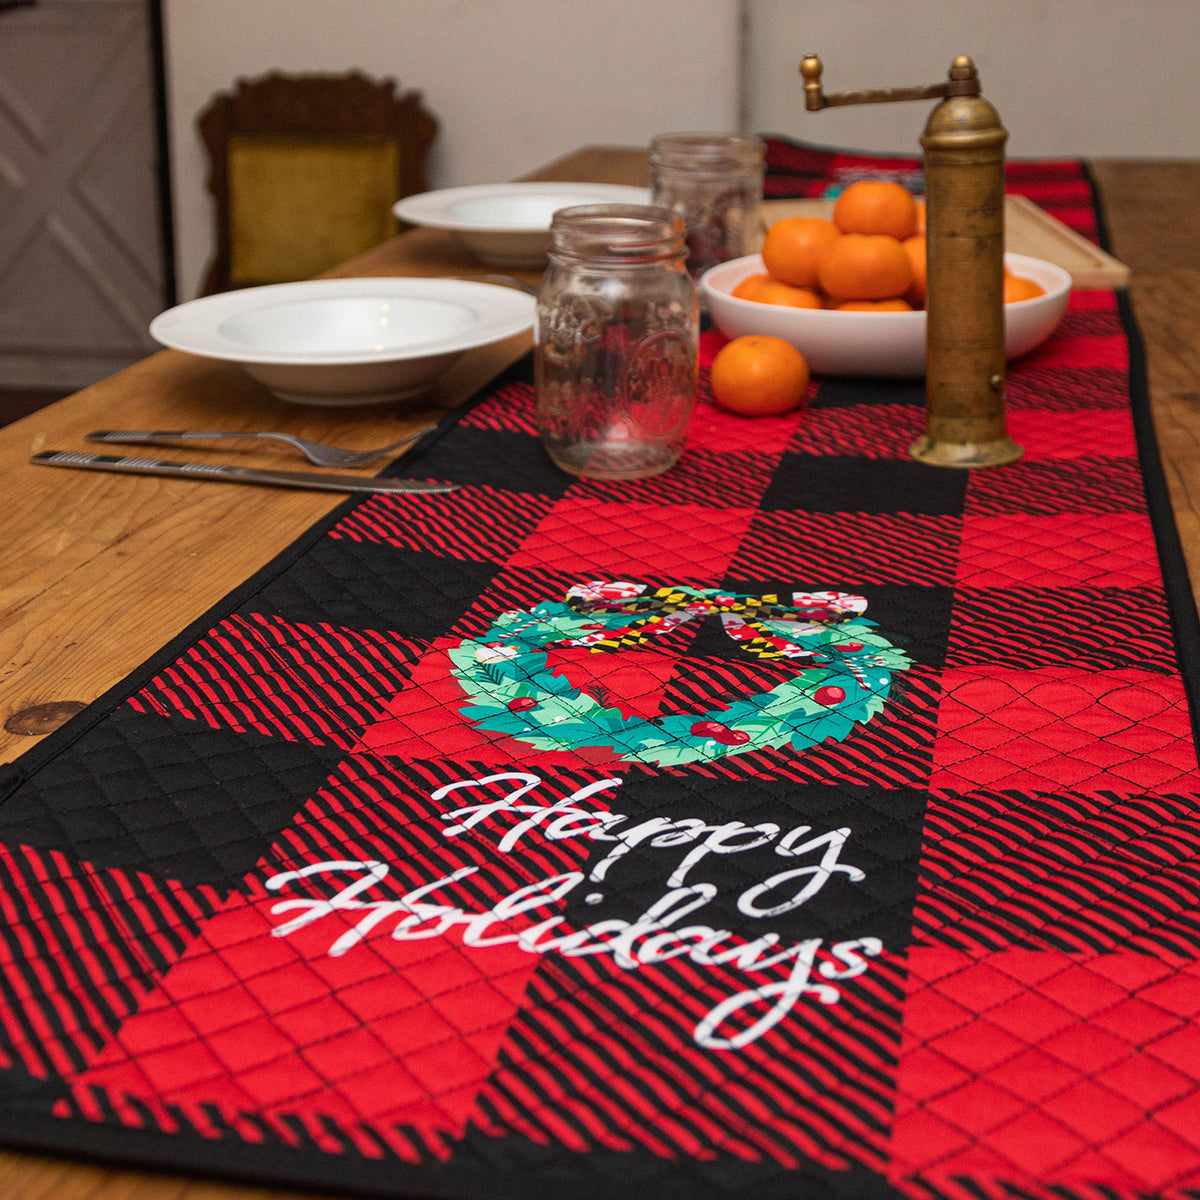 Happy Holidays with Maryland Wreath (Quilted) / Table Runner - Route One Apparel